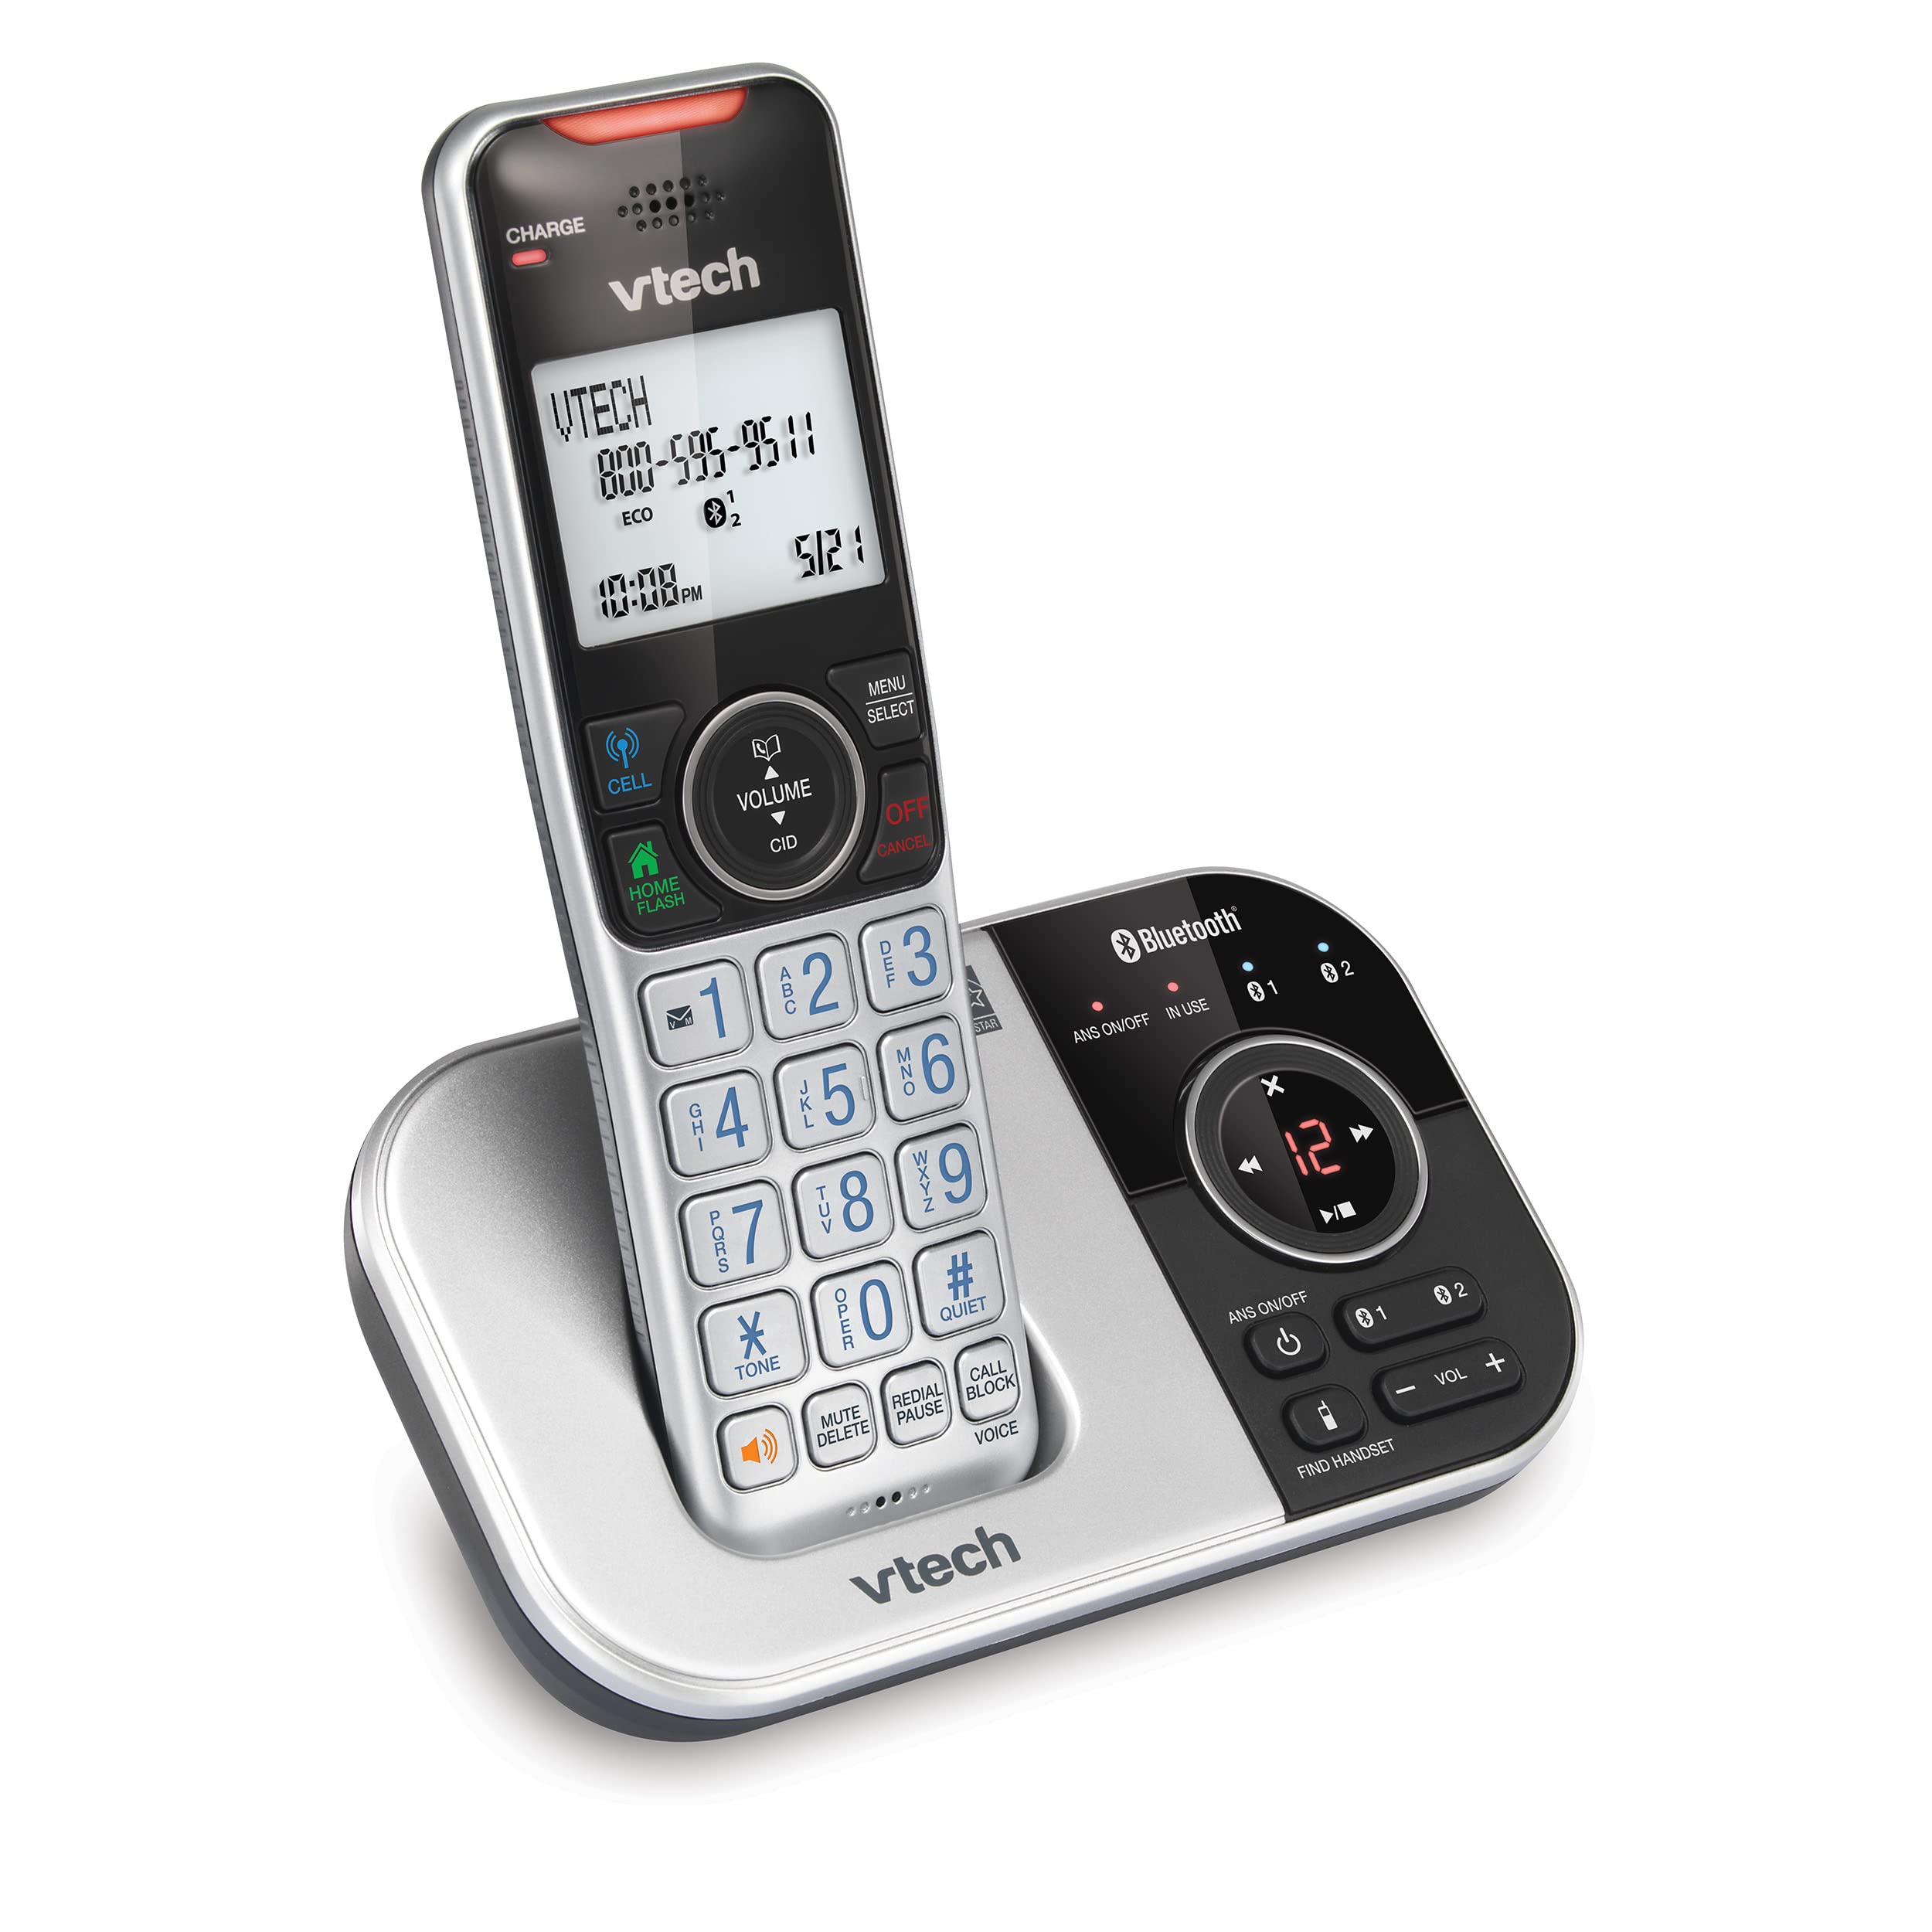 VTech VS112 DECT 6.0 Bluetooth Expandable Cordless Phone for Home with Answering Machine, Call Blocking, Caller ID, Intercom and Connect to Cell (Silver & Black)